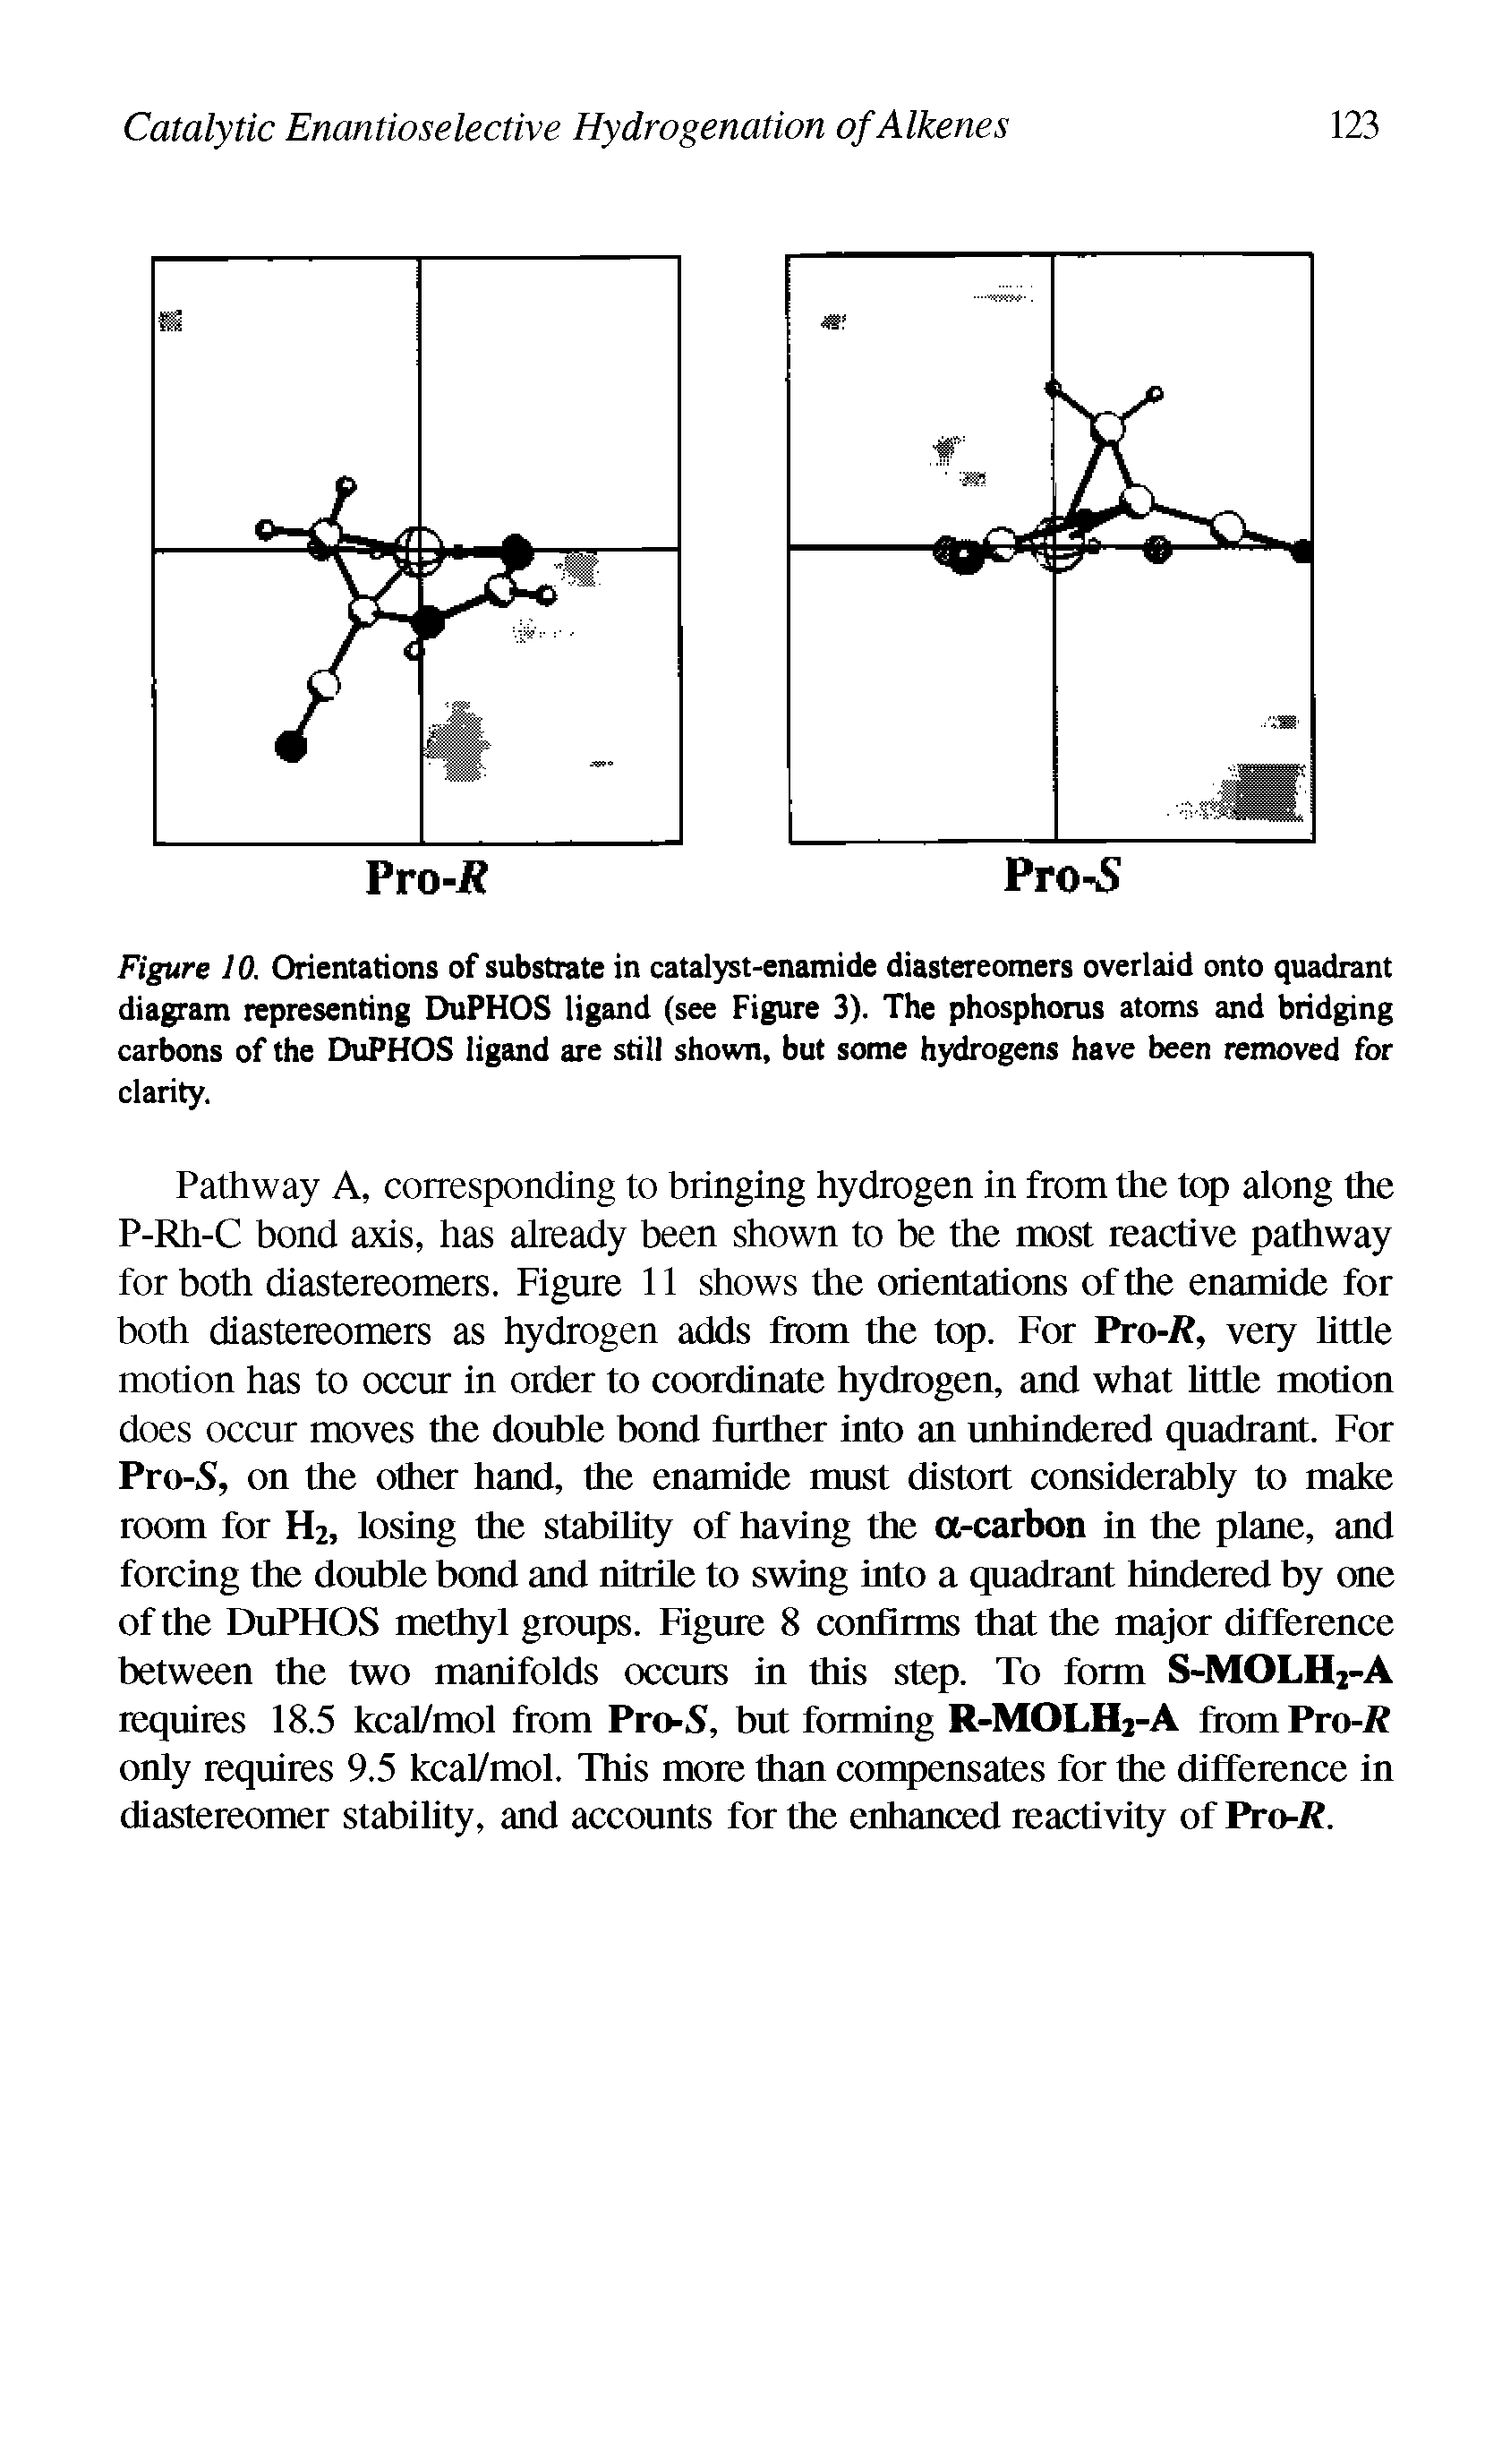 Figure 10. Orientations of substrate in catalyst-enamide diastereomers overlaid onto quadrant diagram representing DuPHOS ligand (see Figure 3). The phosphorus atoms and bridging carbons of the DuPHOS ligand are still shown, but some hydrogens have been removed for clarity.